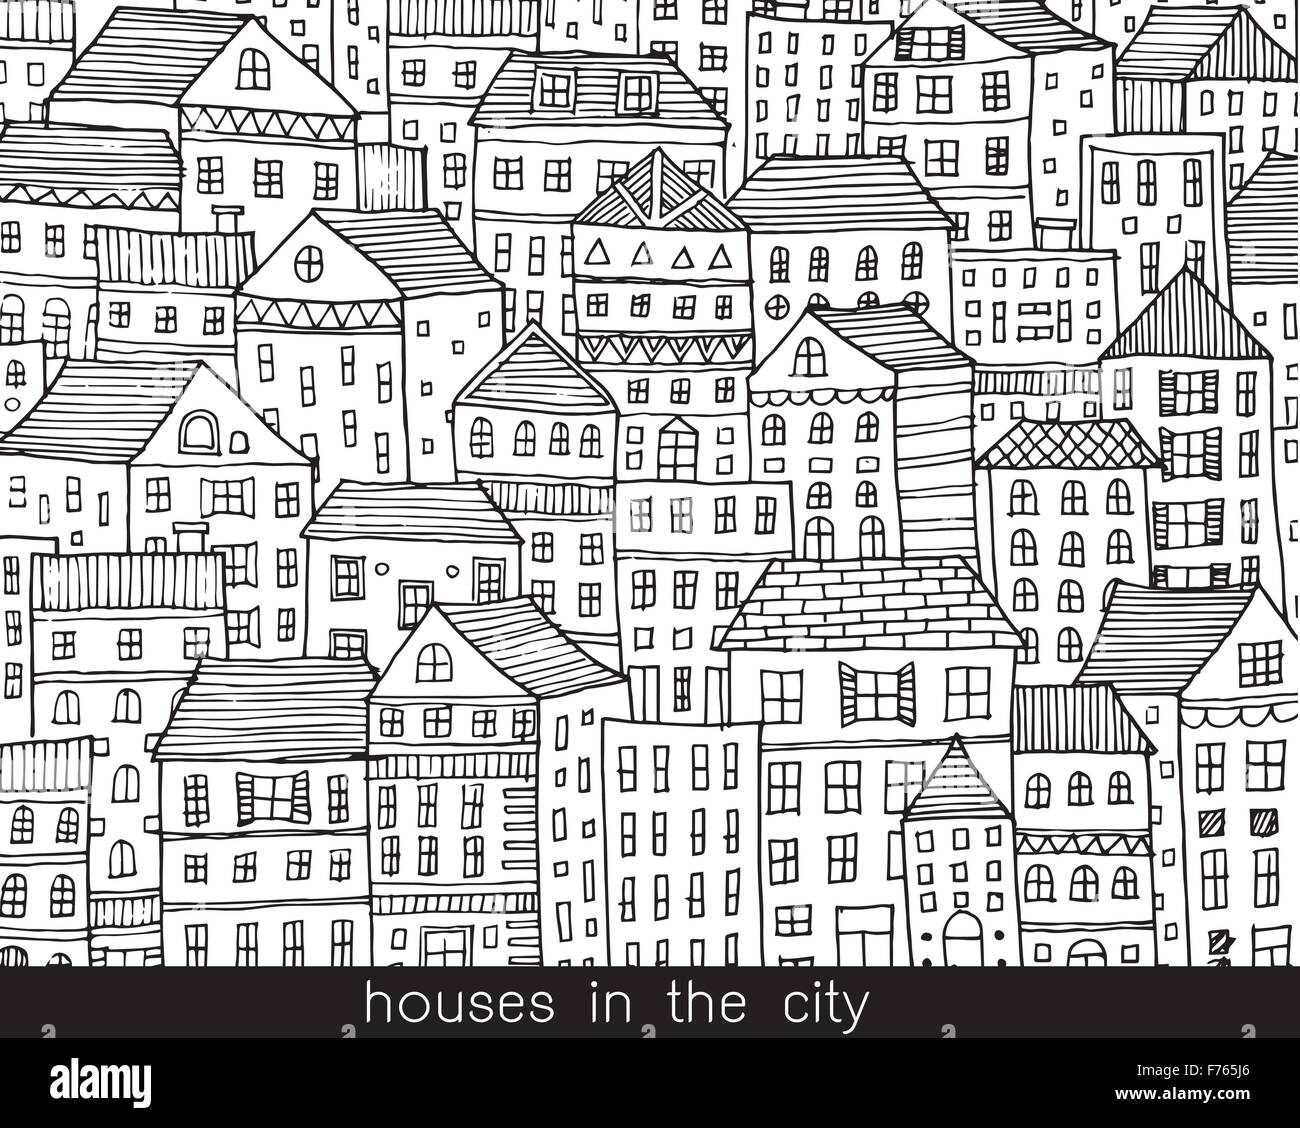 Houses in the city doodle illustration sketch style Vector Stock Vector